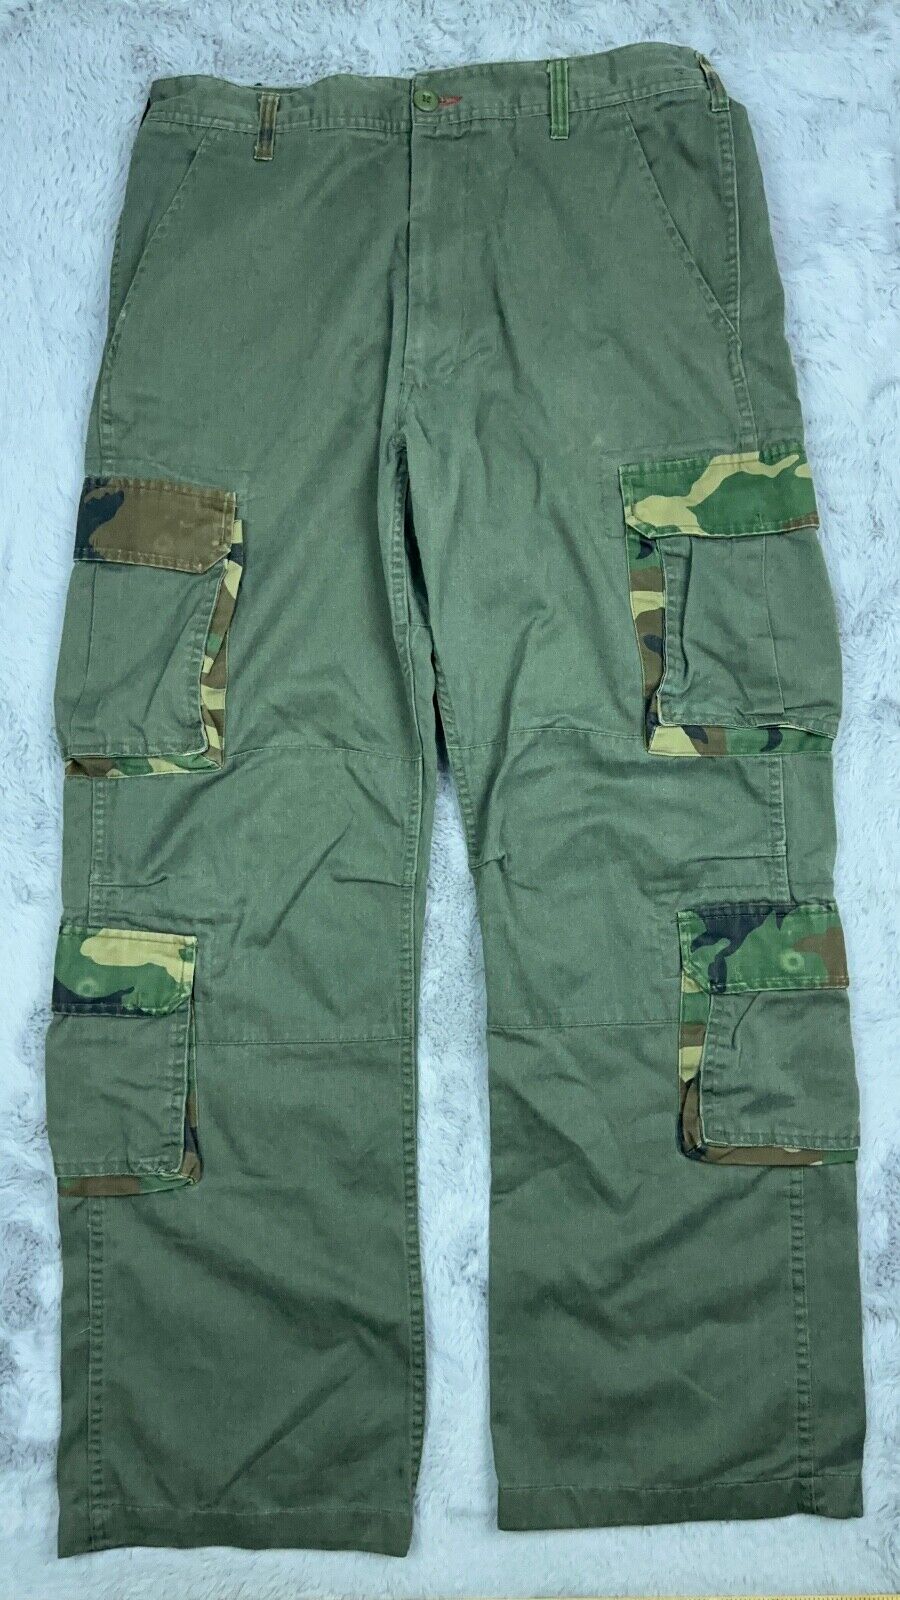 Rothco Pants Mens Medium Regular Olive Drab with Woodland Accents Paratrooper